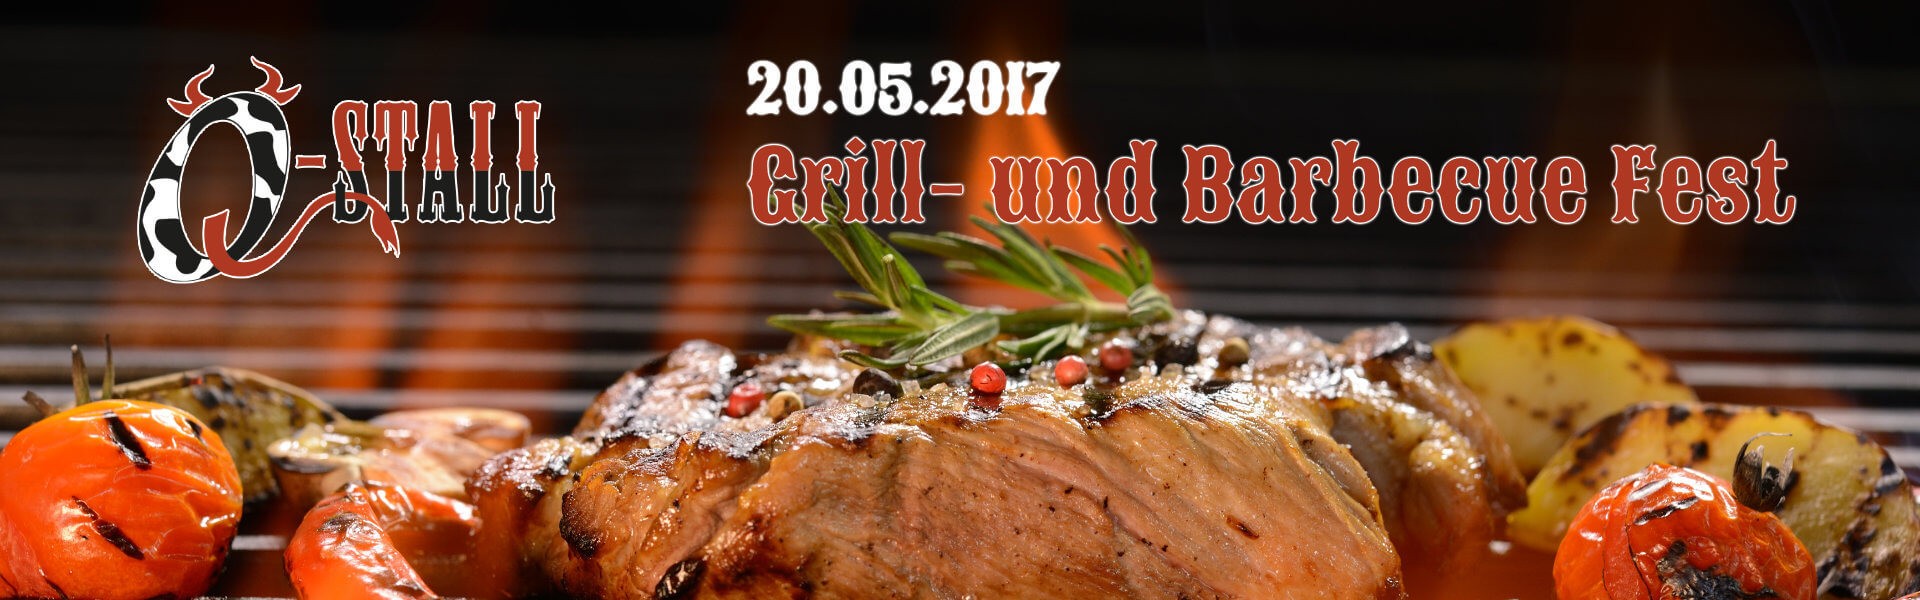 Q-Stall - Grill- und Barbecue Fests